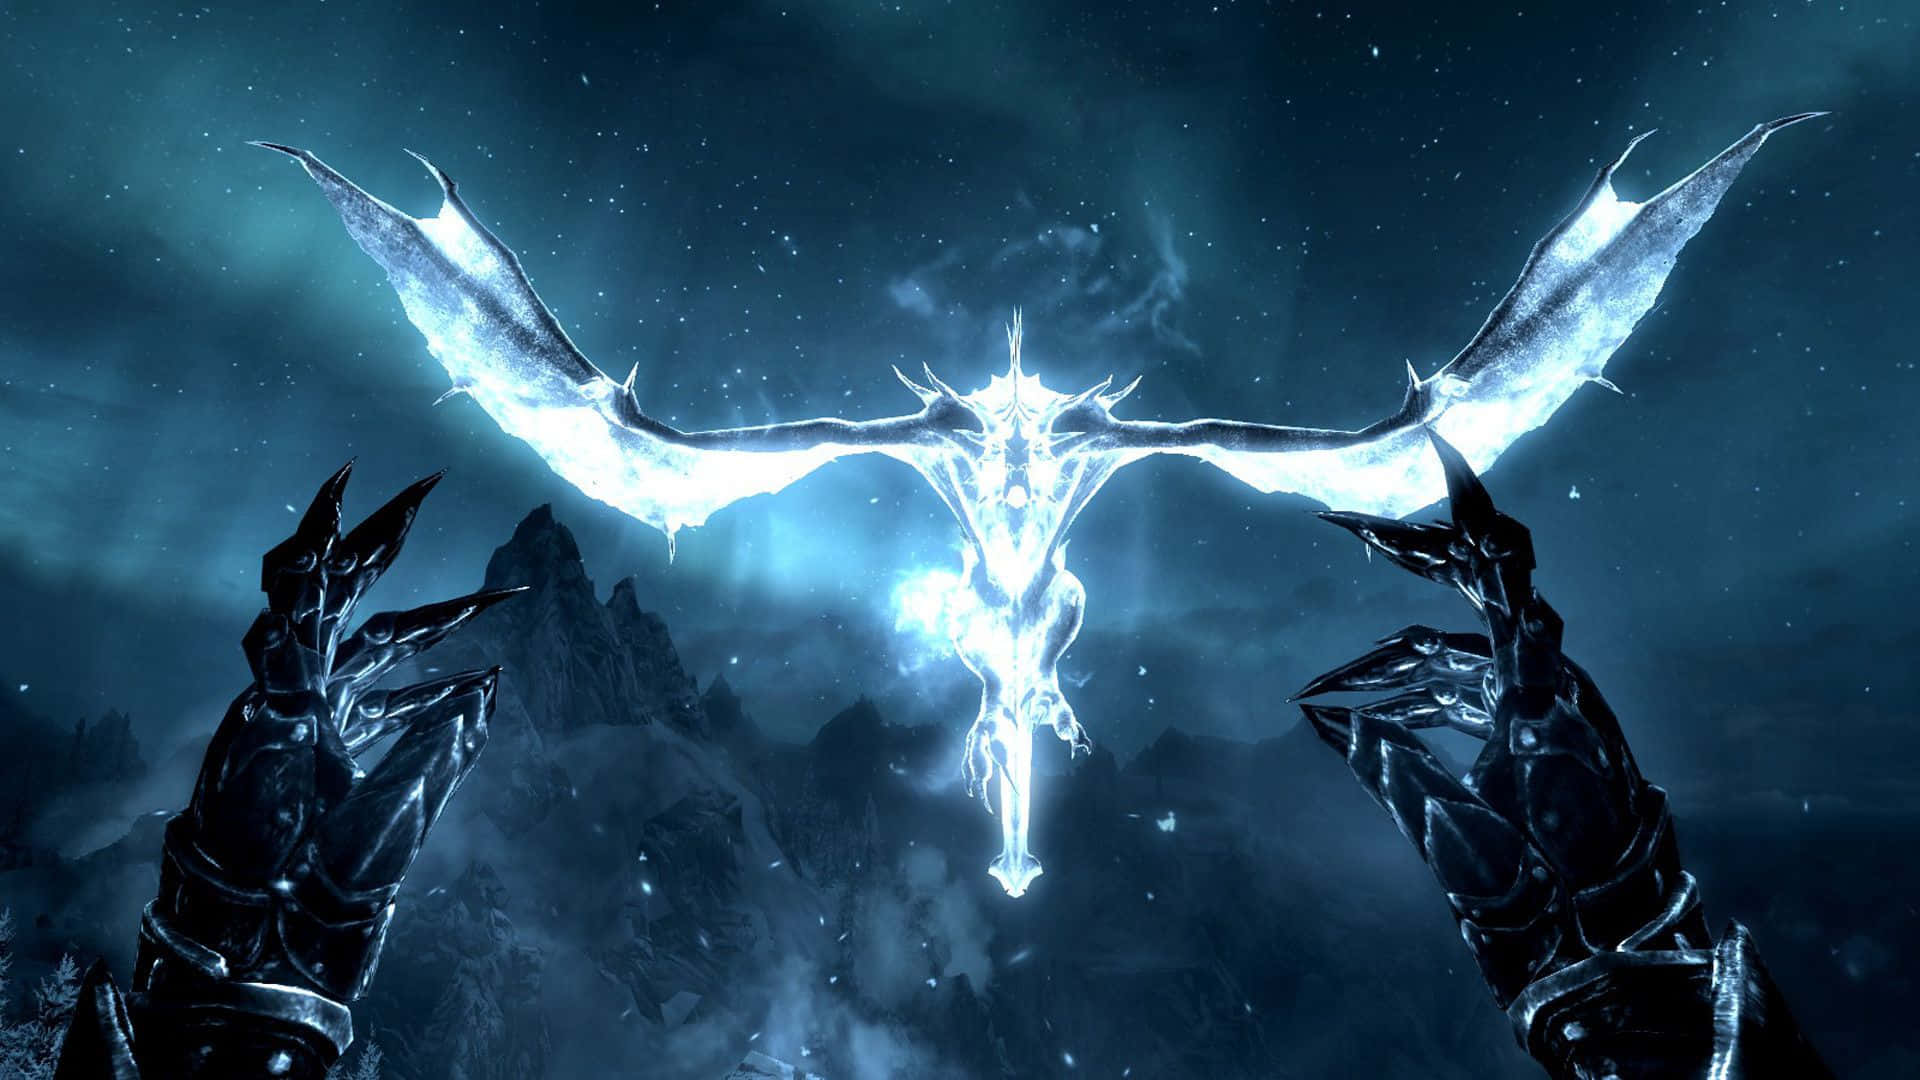 Explore the world of Skyrim from the comfort of your home Wallpaper